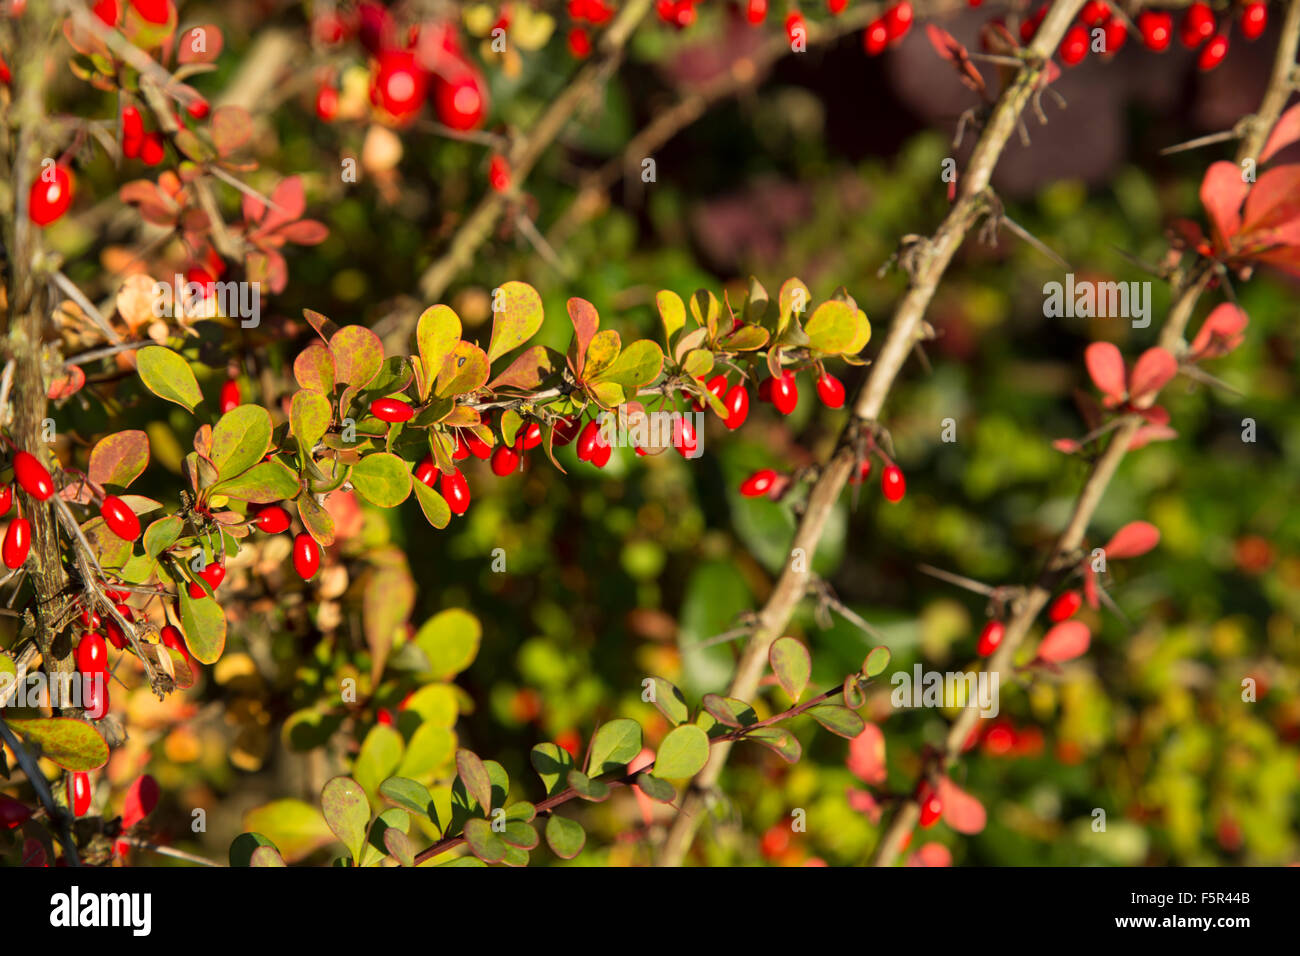 Autumn Barberry Edible red berries and thorns Stock Photo